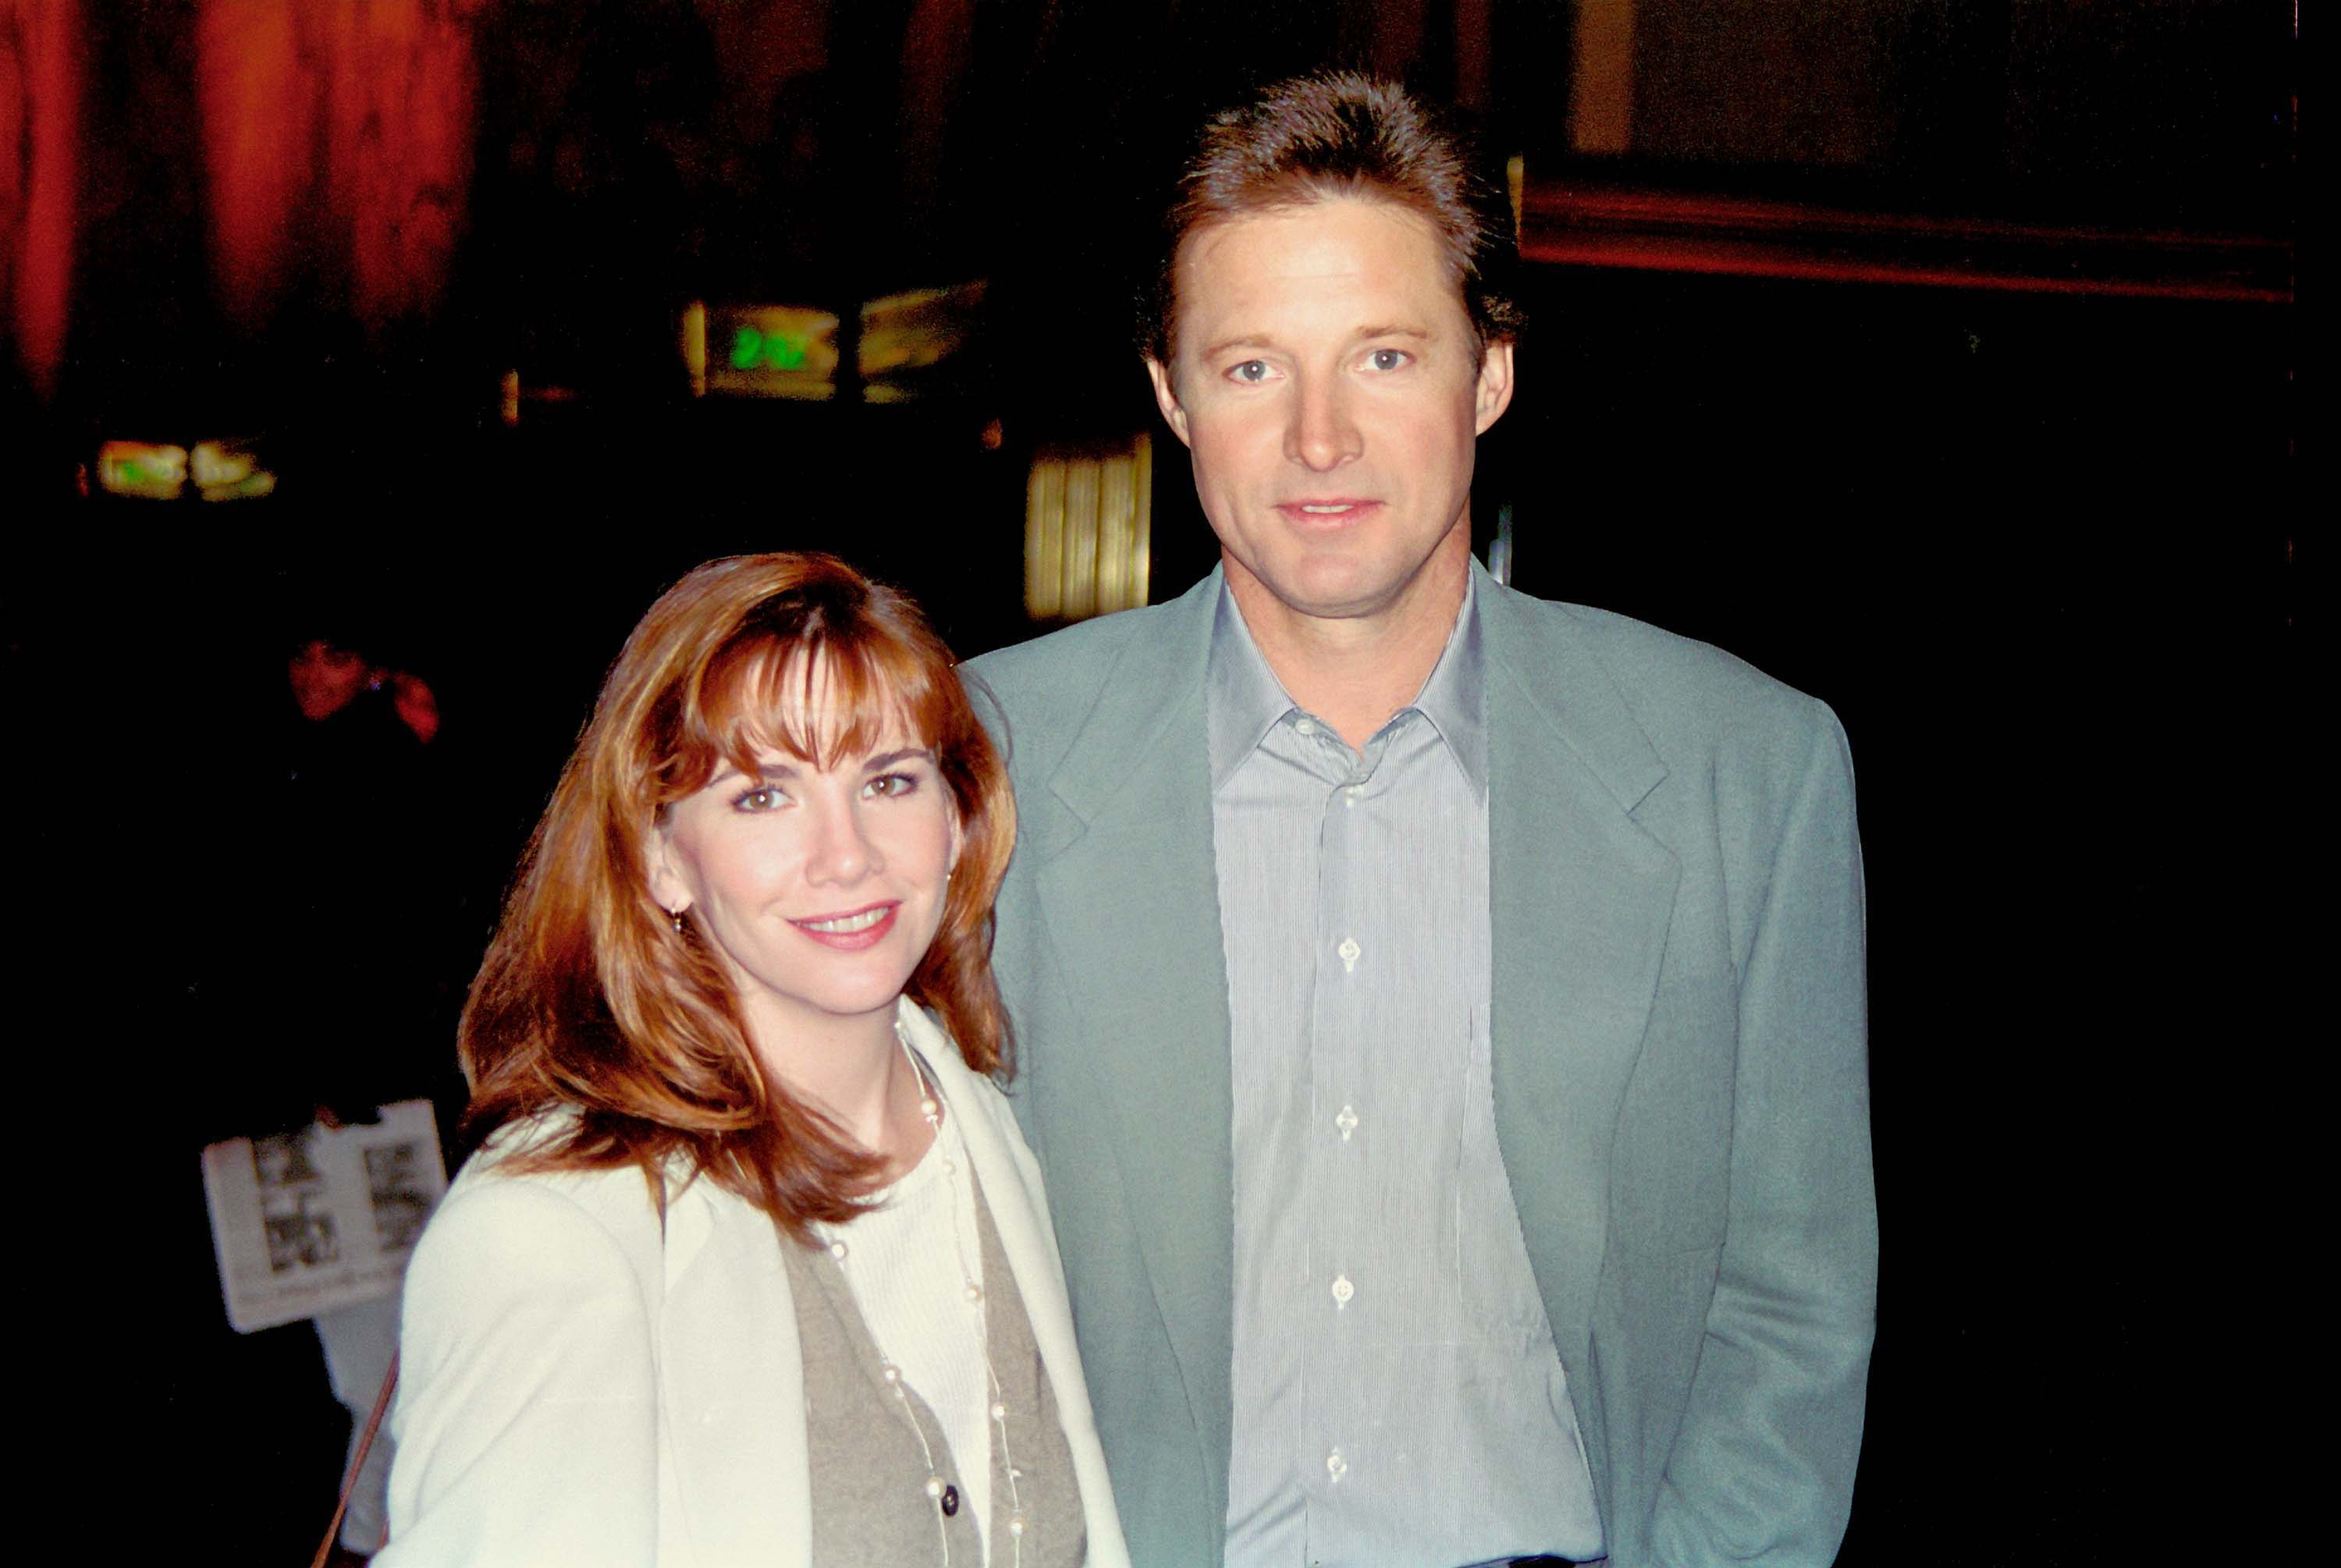 Melissa Gilbert and Bruce Boxleitner attending an event together in the 1990s.